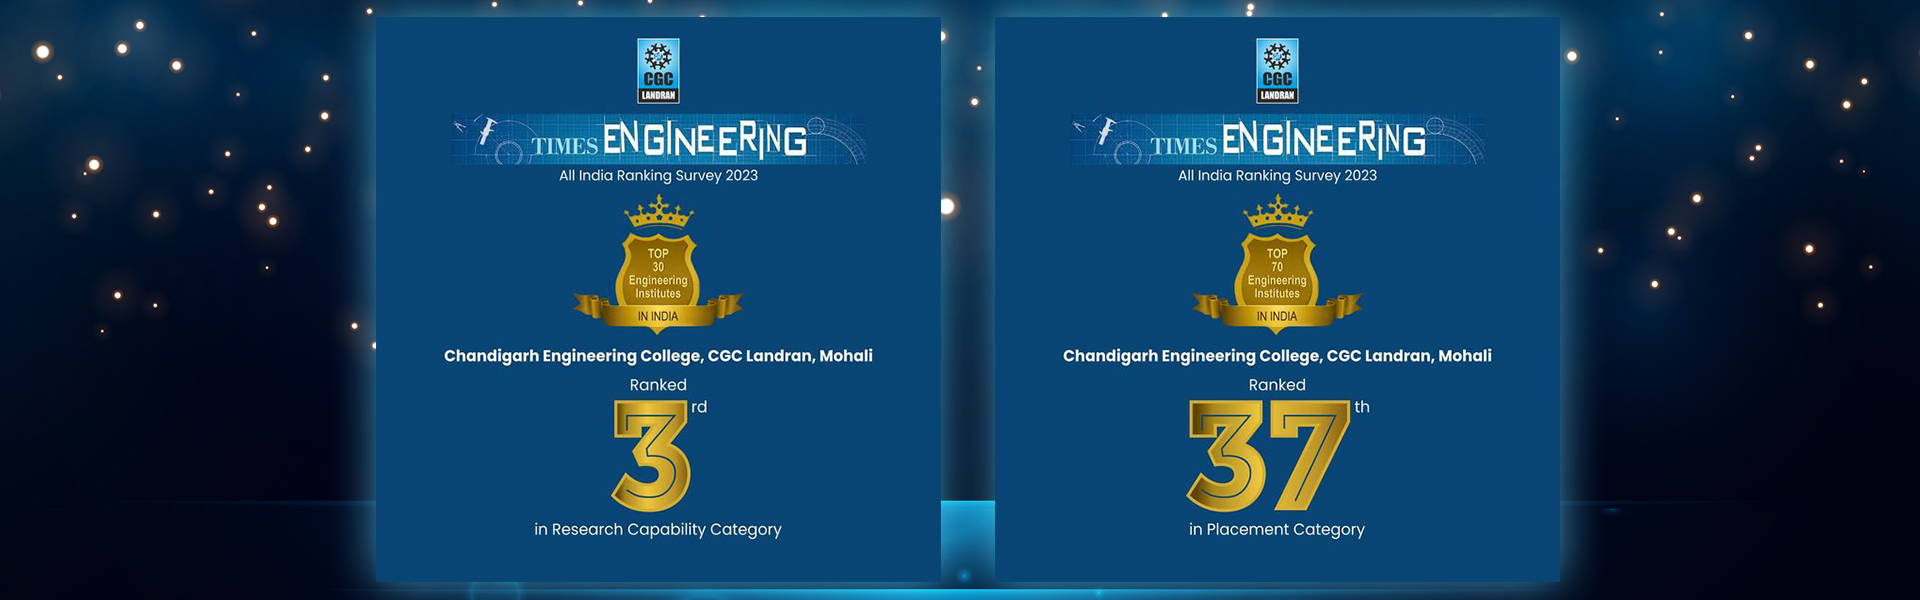 Times Engineering All India Ranking Survey 2023 